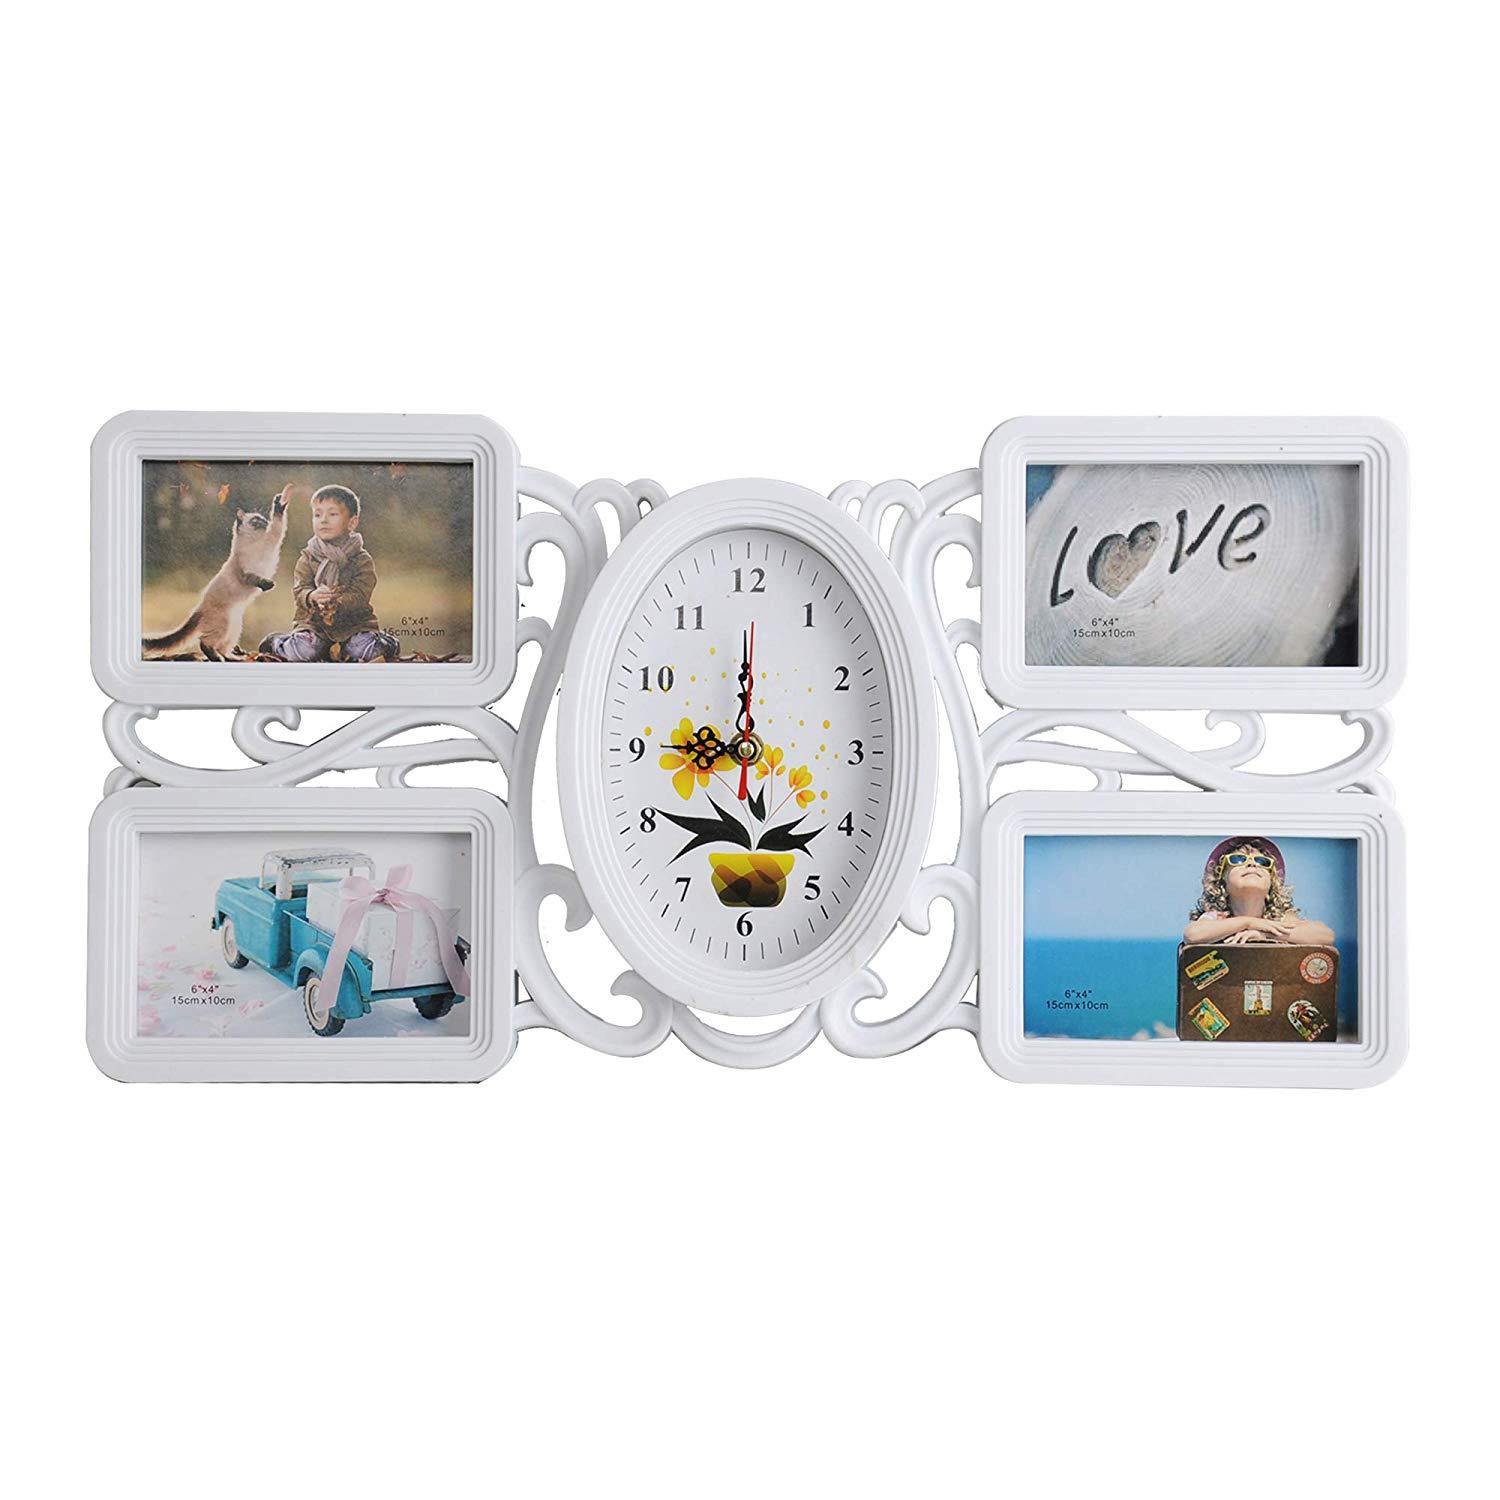 Bosonshop Collage Pictures Frames 4 Openings White Photo Holder with Glass Front for Family,20.5 X 11